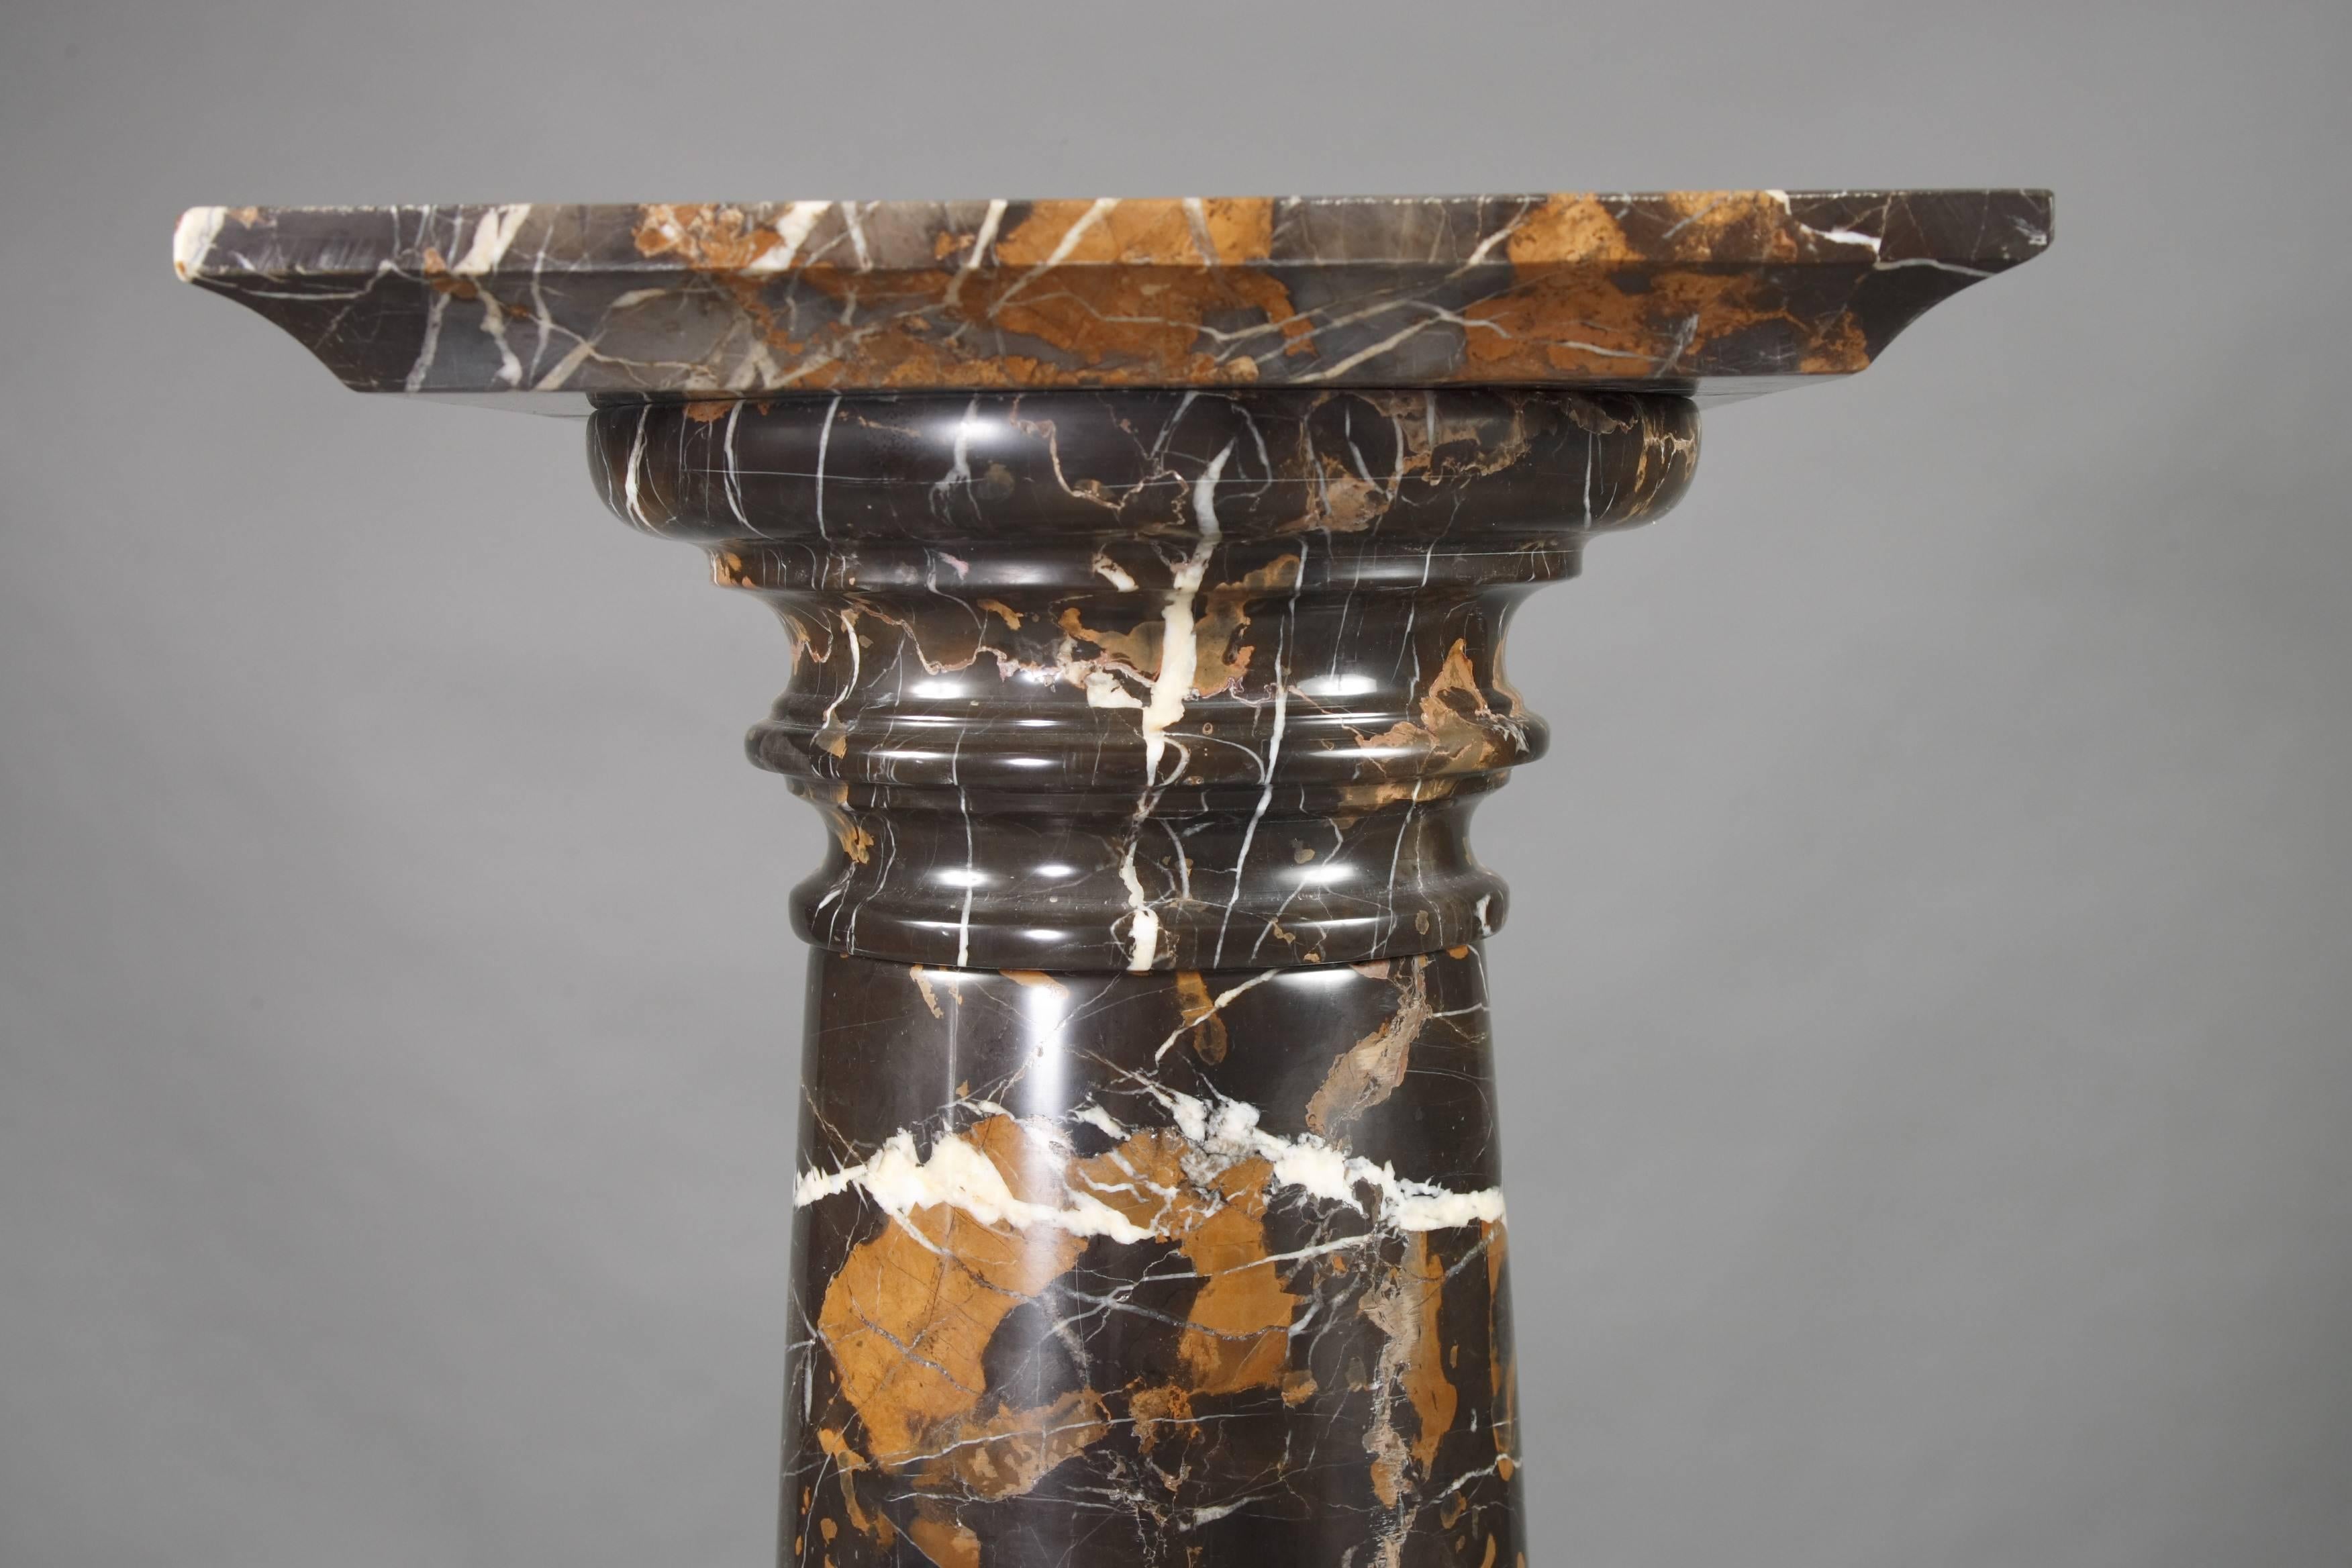 Black marble with grey-white grain. Stepped round foot in distended shank. Ovoider body, slightly rising neck and broad arched edge.
This column can be divided in five pieces.

Very heavy more than 80kg.